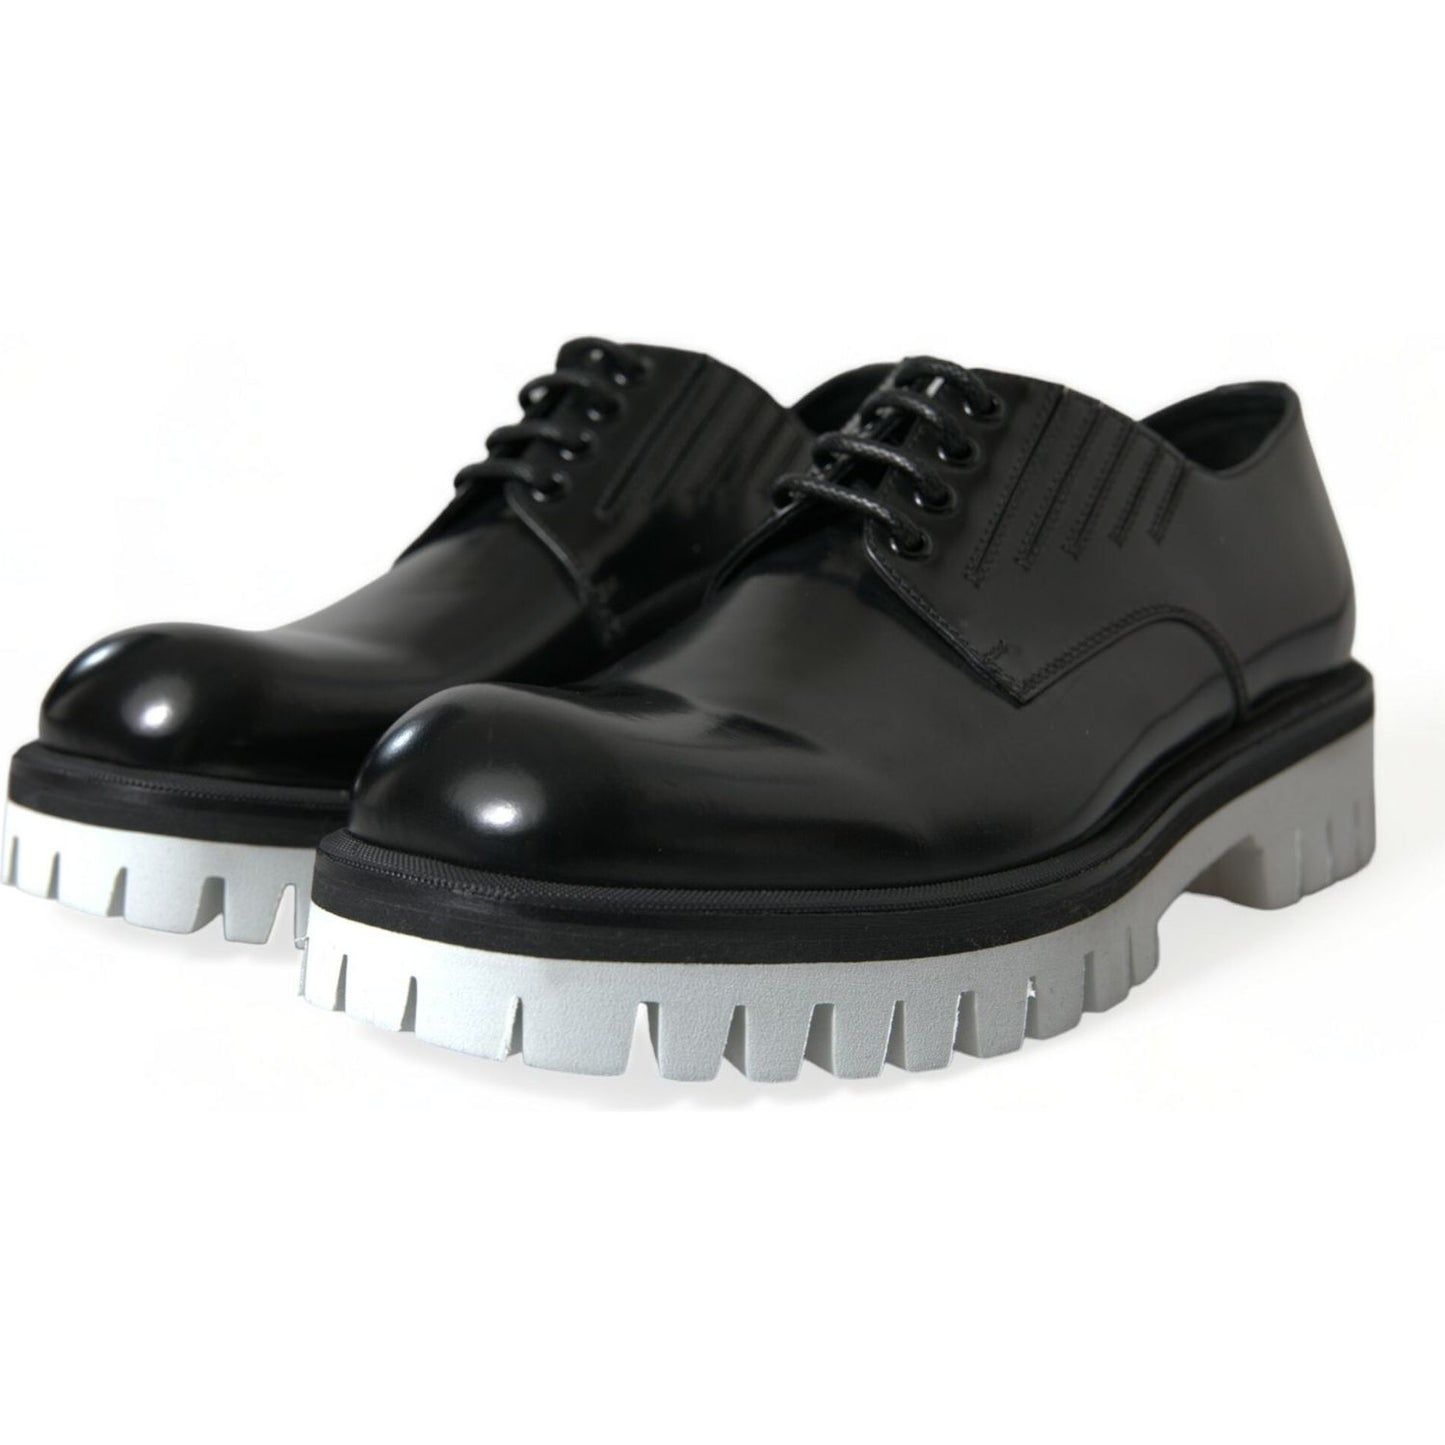 Dolce & Gabbana Sophisticated Black and White Leather Derby Shoes black-white-leather-lace-up-derby-dress-shoes